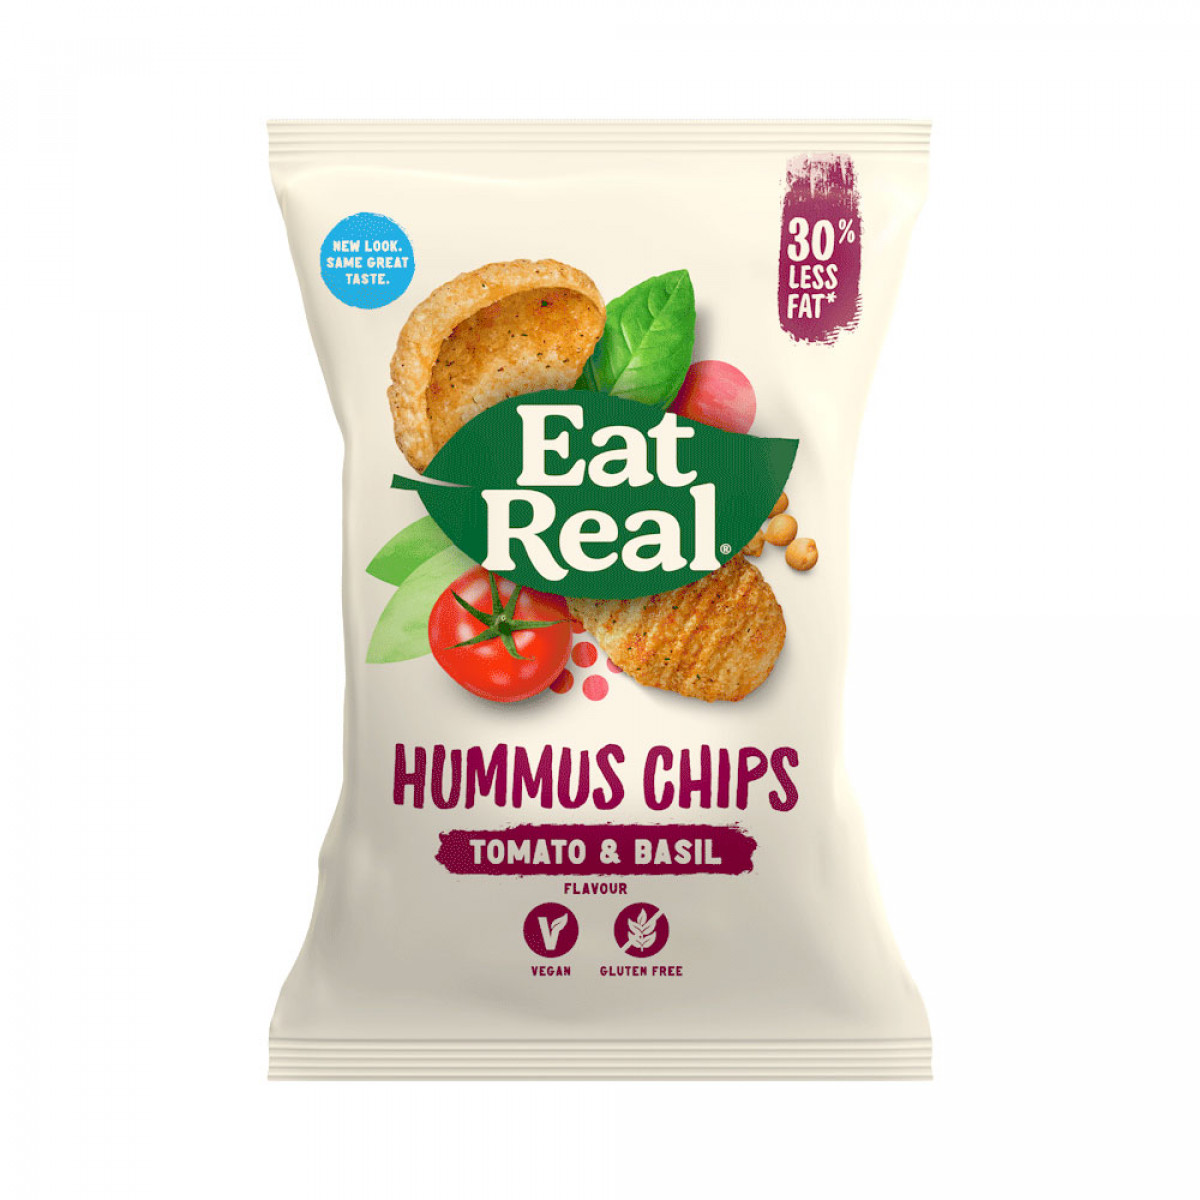 Product picture for Hummus Chips Tomato & Basil